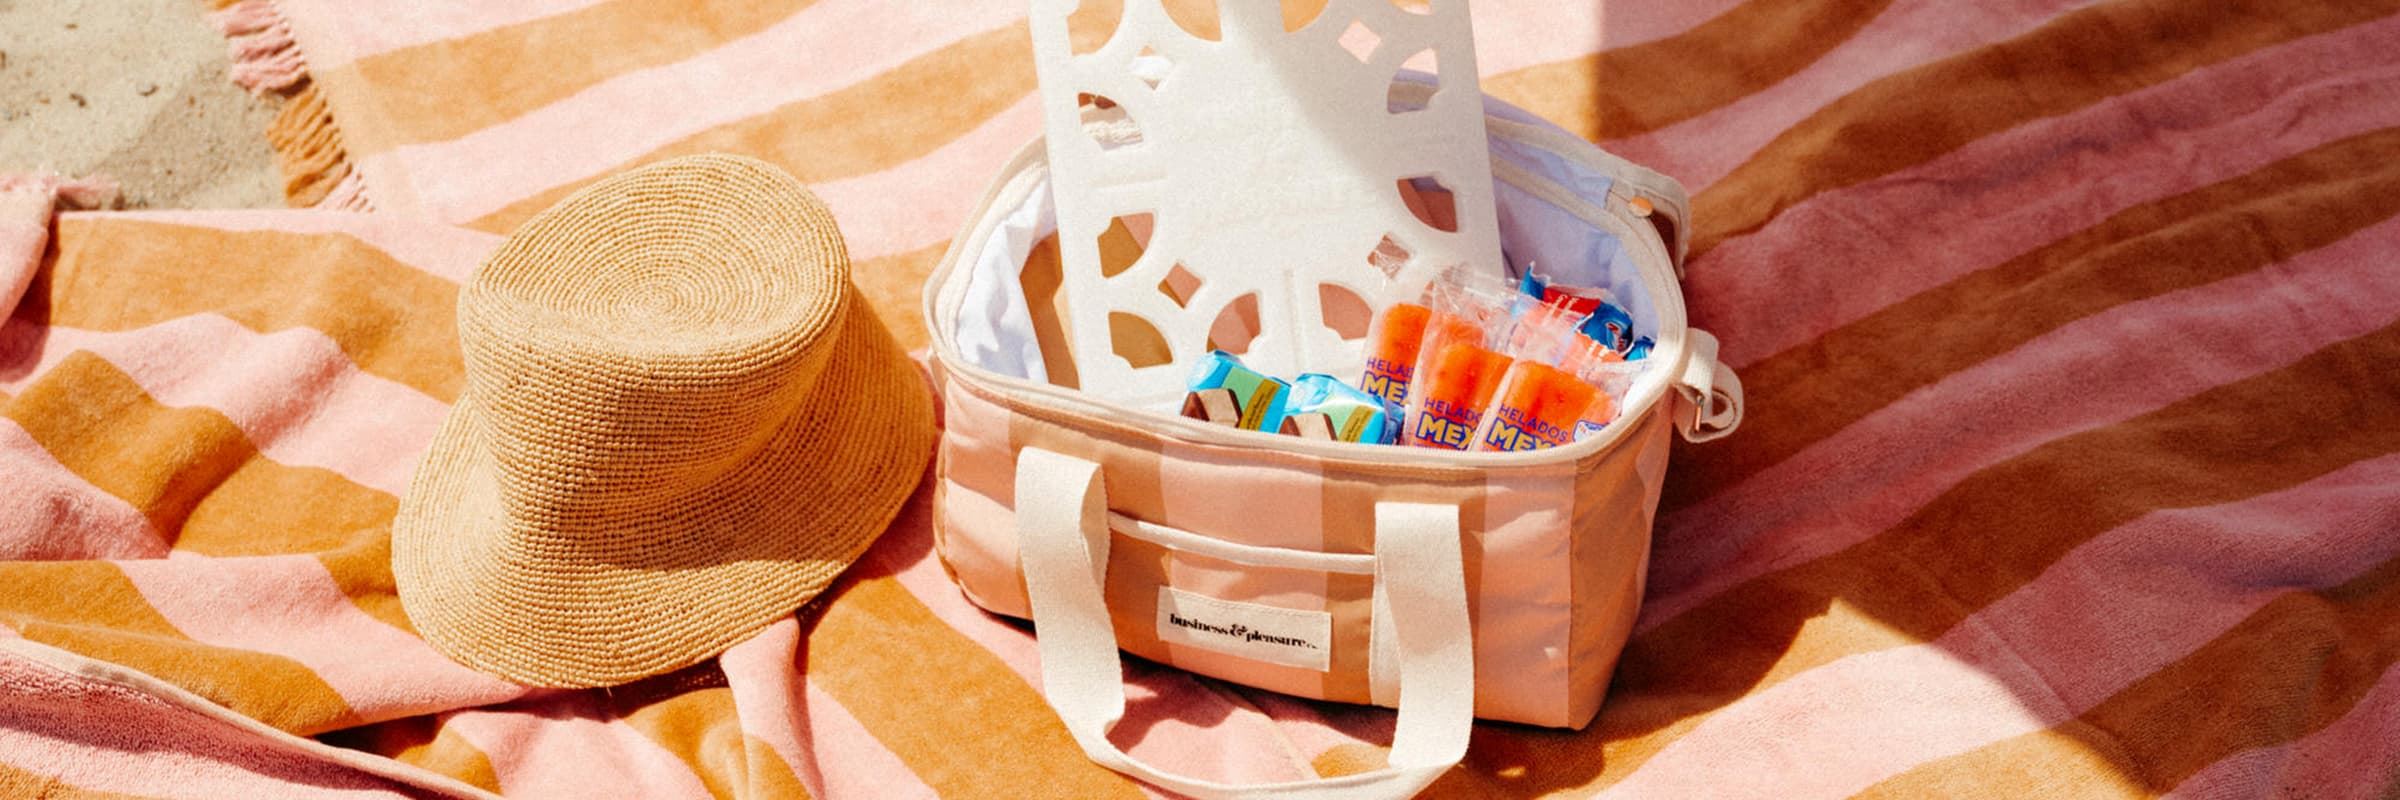 pink and gold striped cooler with a hat and towel on the beach